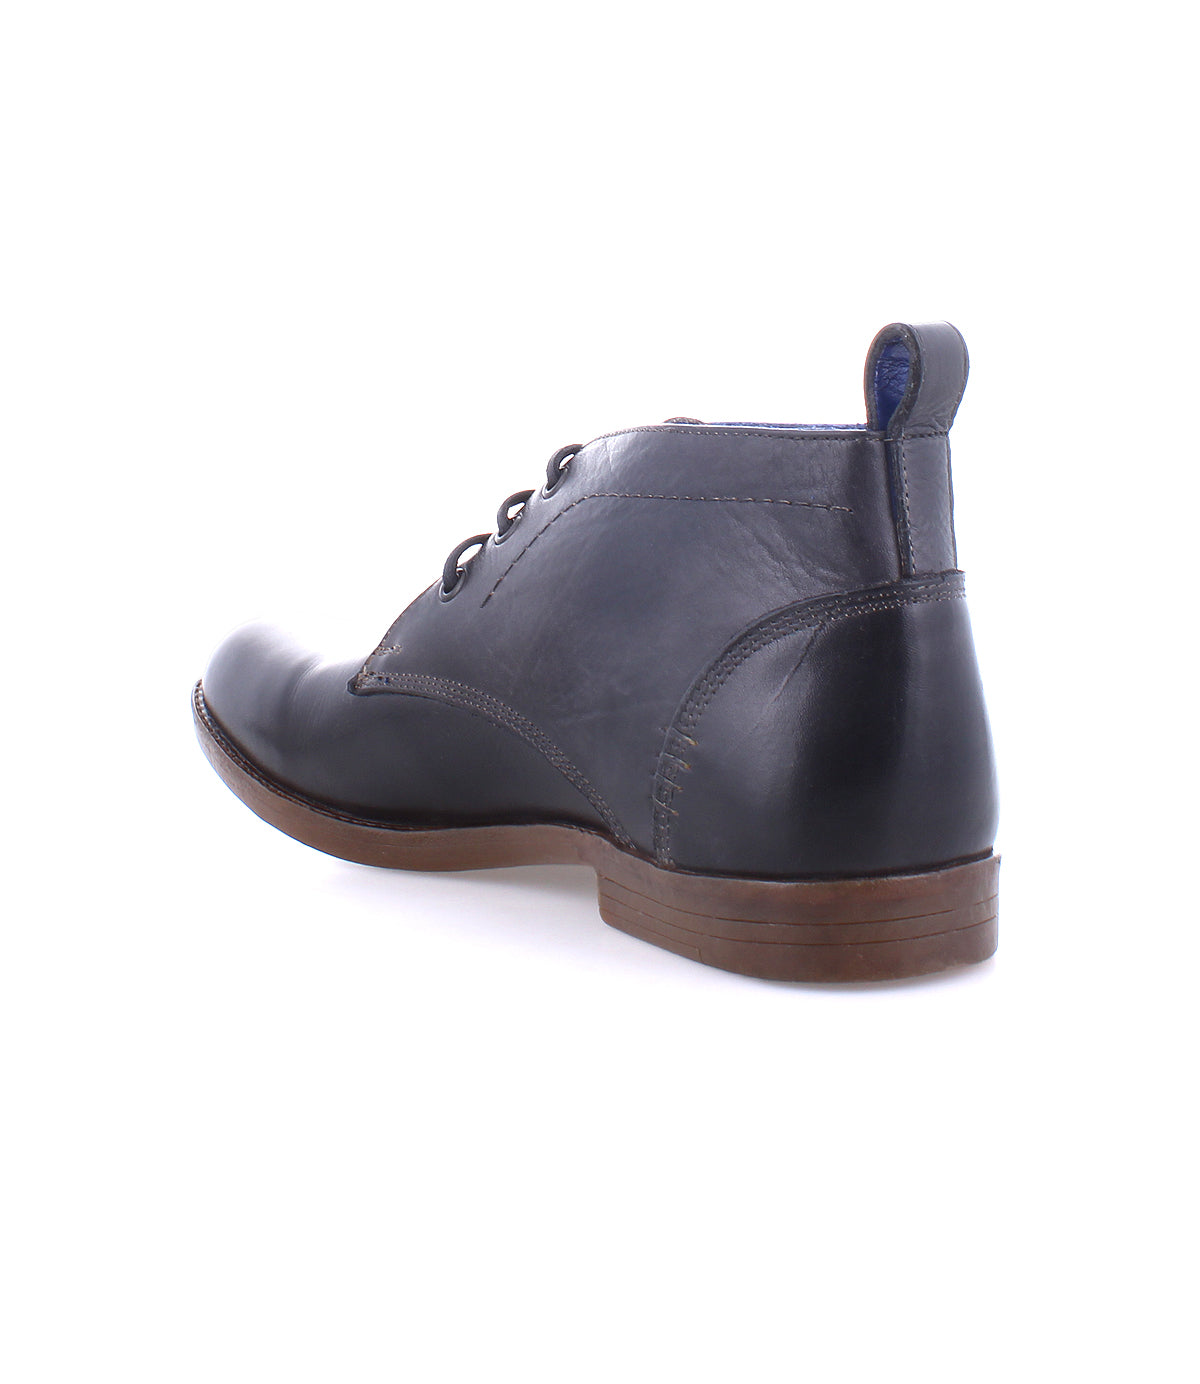 A single Illiad dark navy leather chukka boot with laces and a cushioned insole on a white background by Bed Stu.